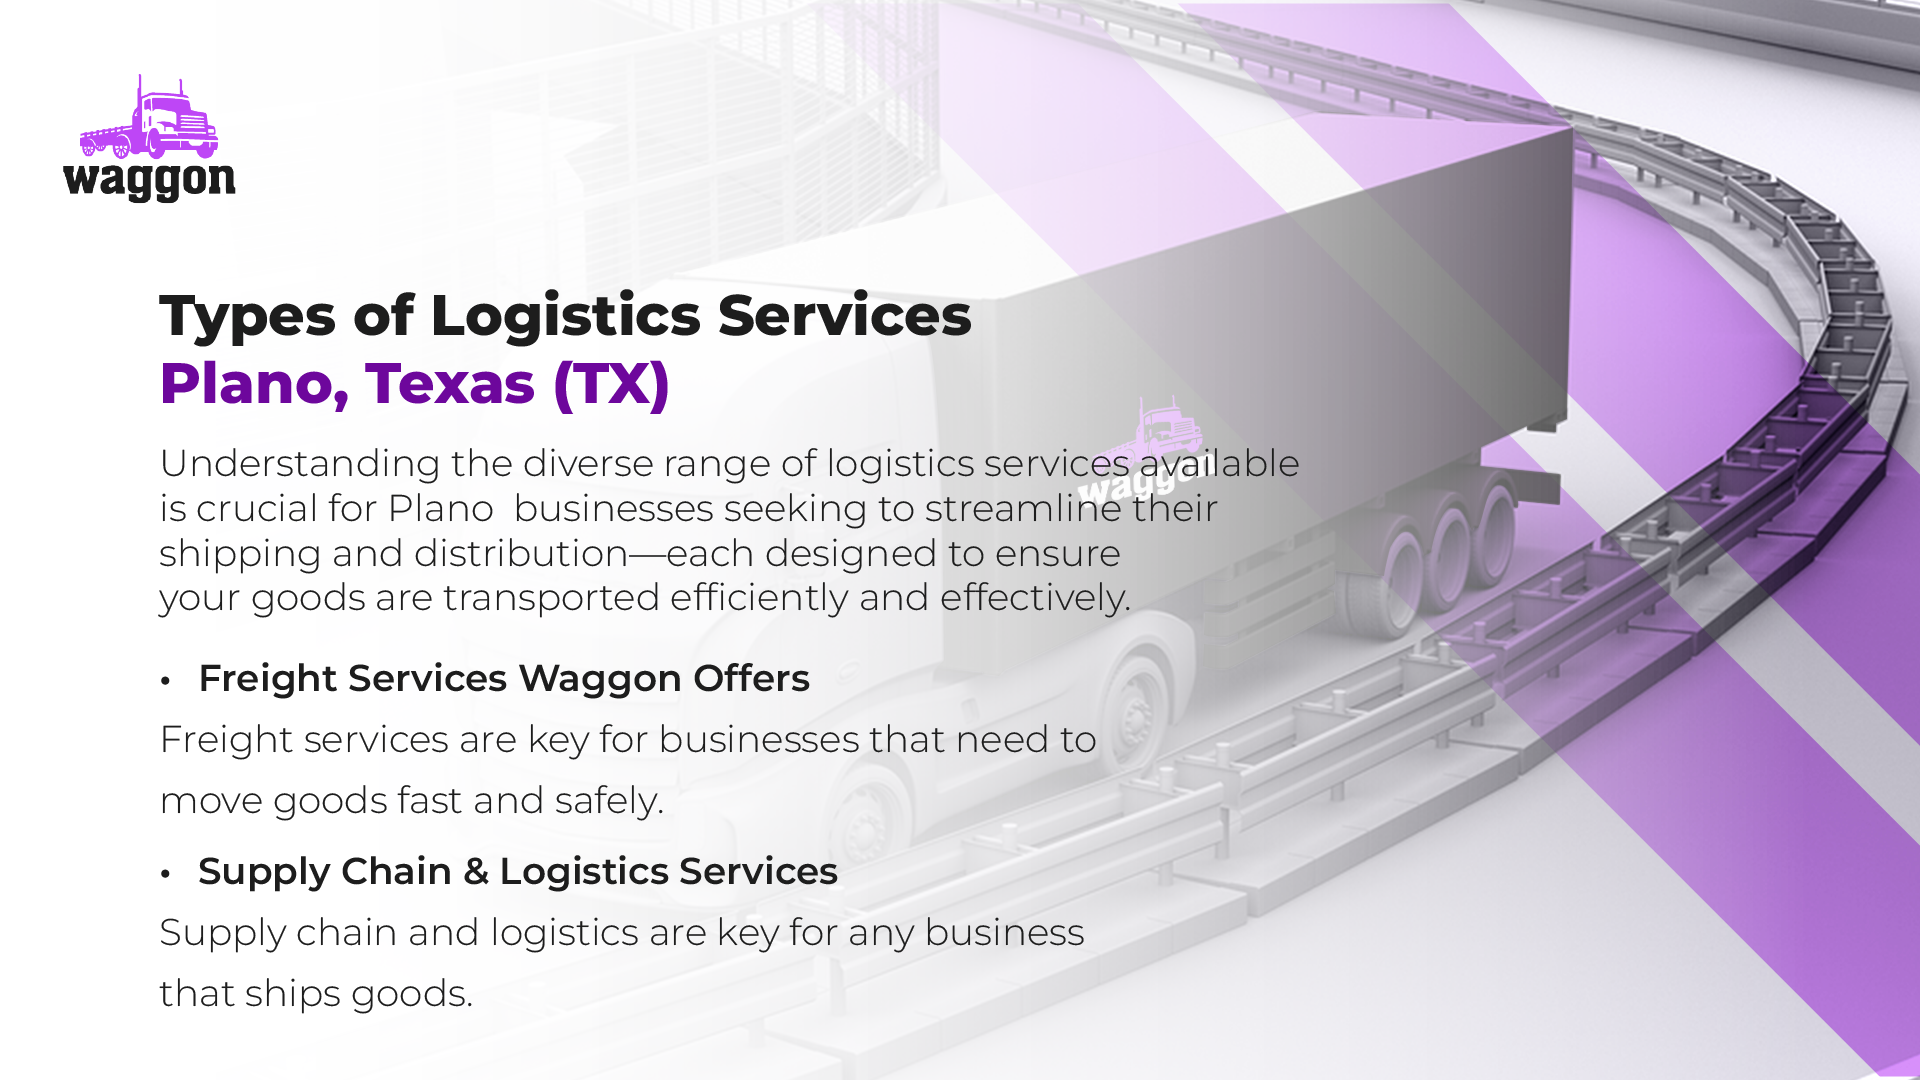 Types of Logistics Services in Plano, Texas (TX)